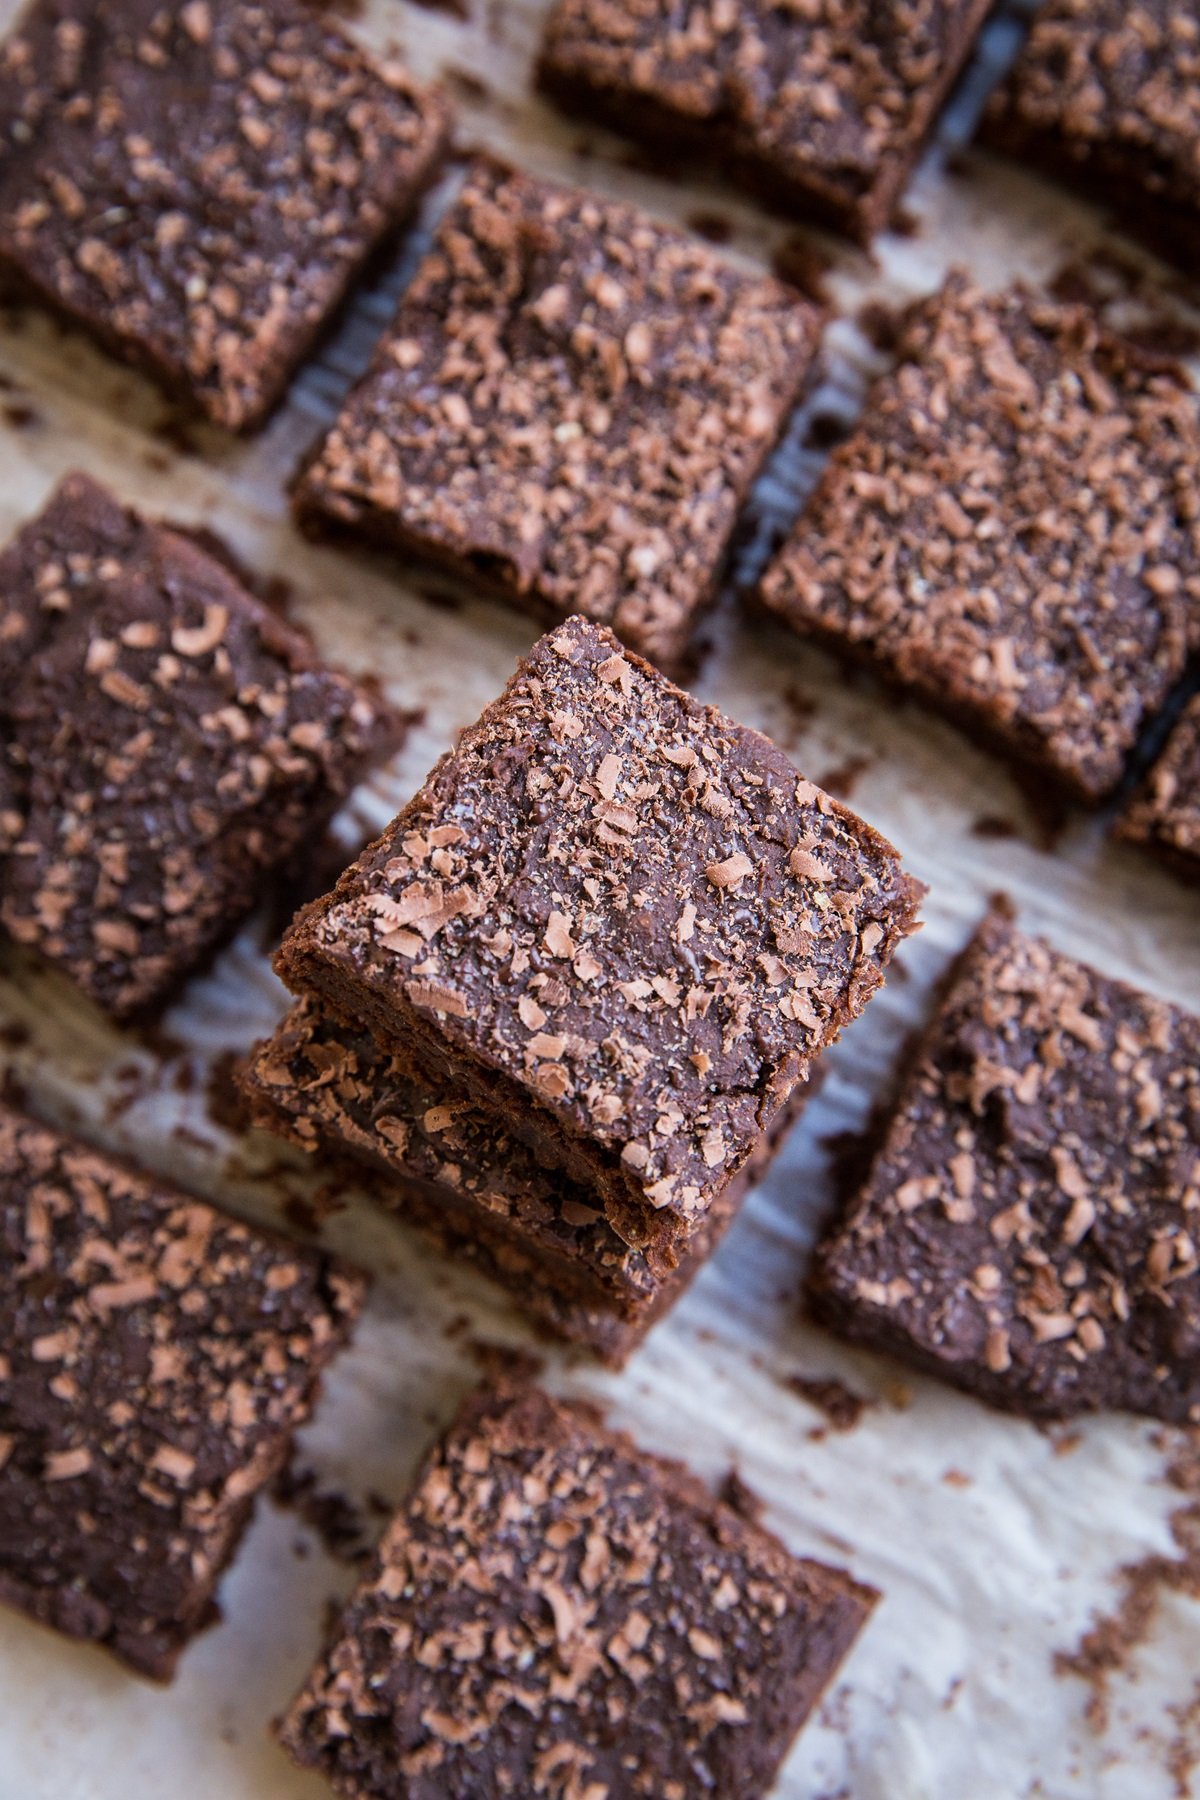 Chickpea brownies cut into slices and sprinkled with chocolate shavings.